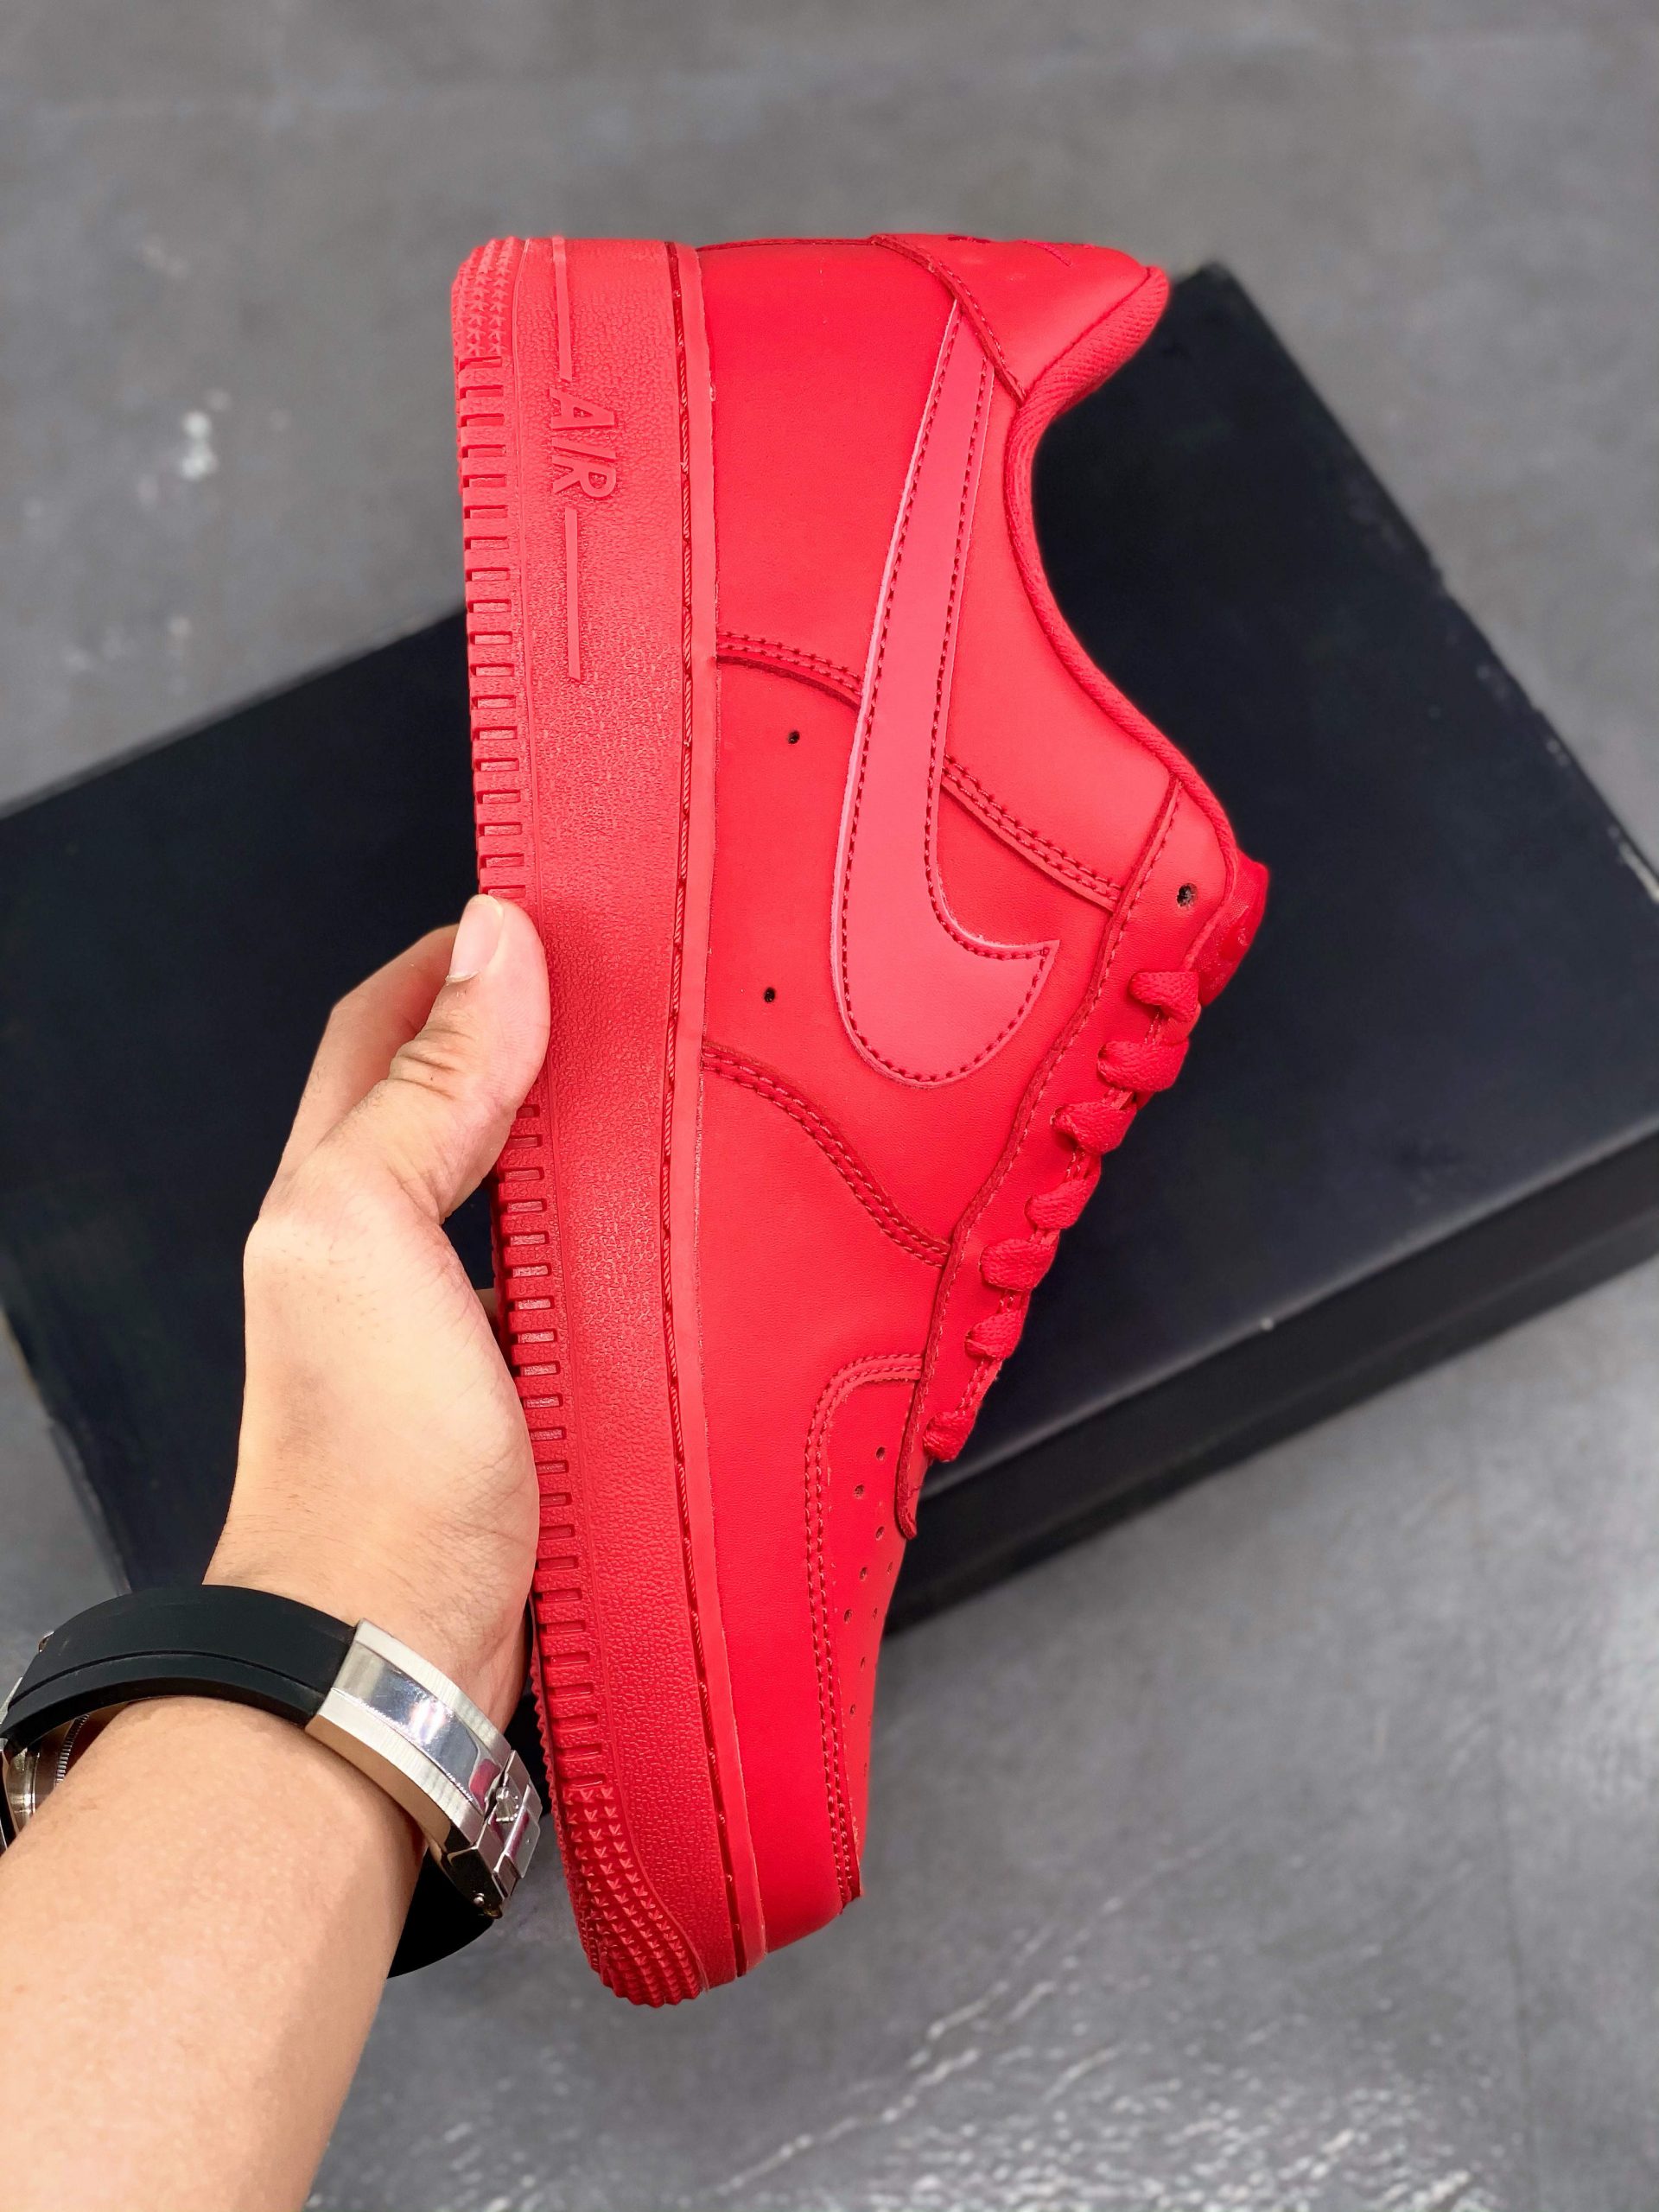 Nike Air Force 1 University Red/Black CW6999-600 For Sale – Sneaker Hello